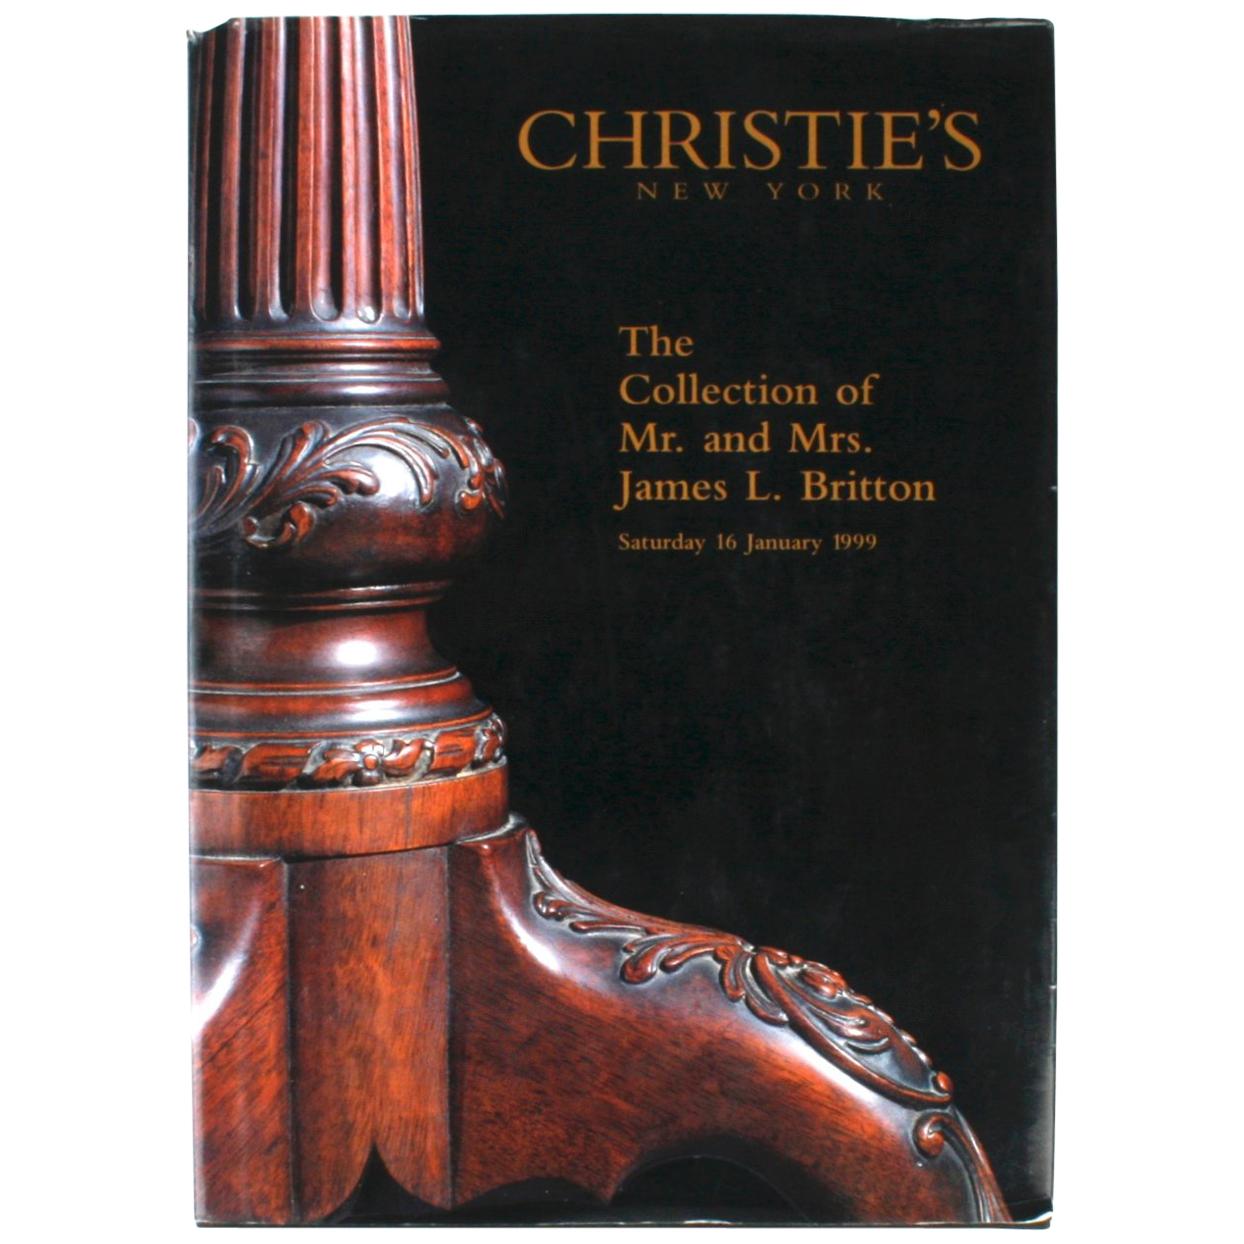 Collection of Mr. and Mrs. James L. Britton: Christie's, New York